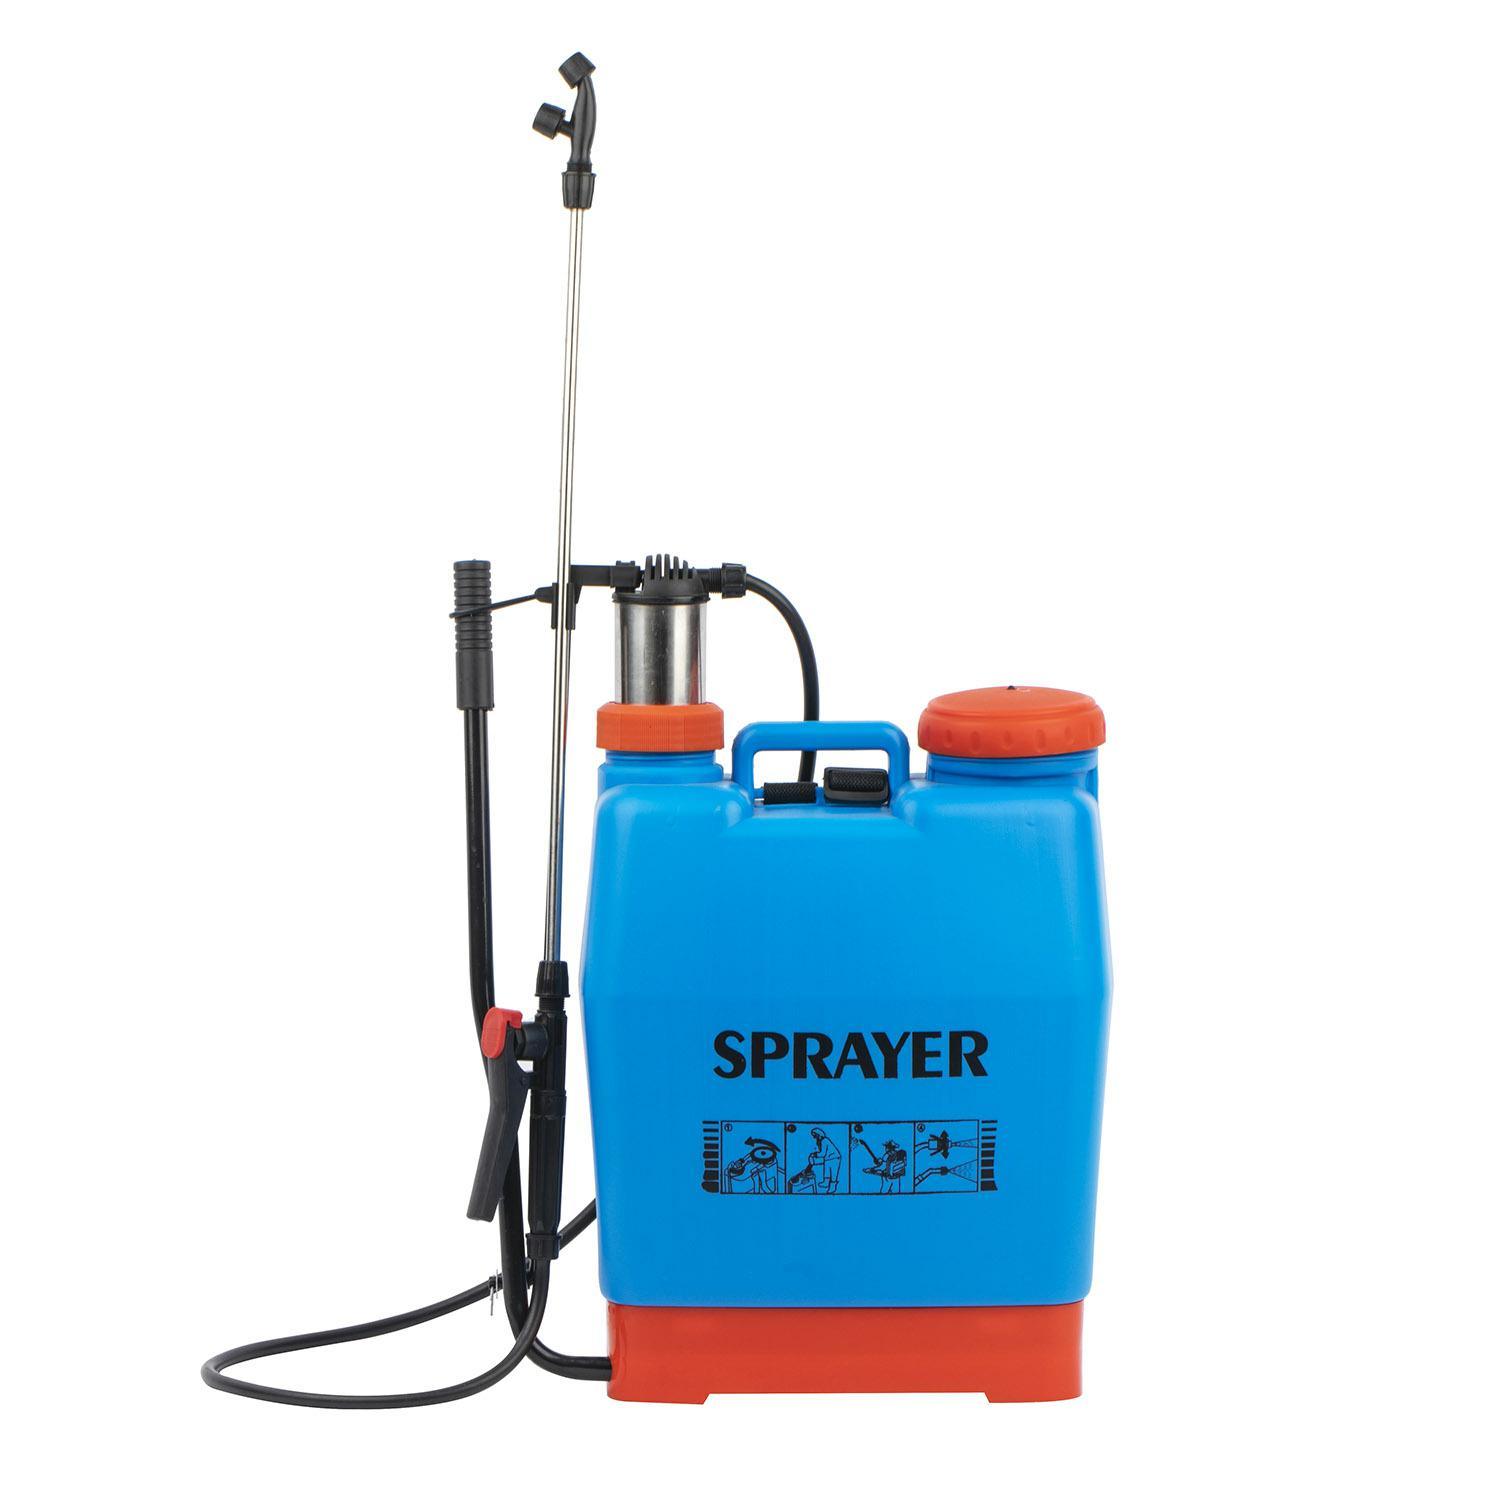 The use of agriculture sprayers